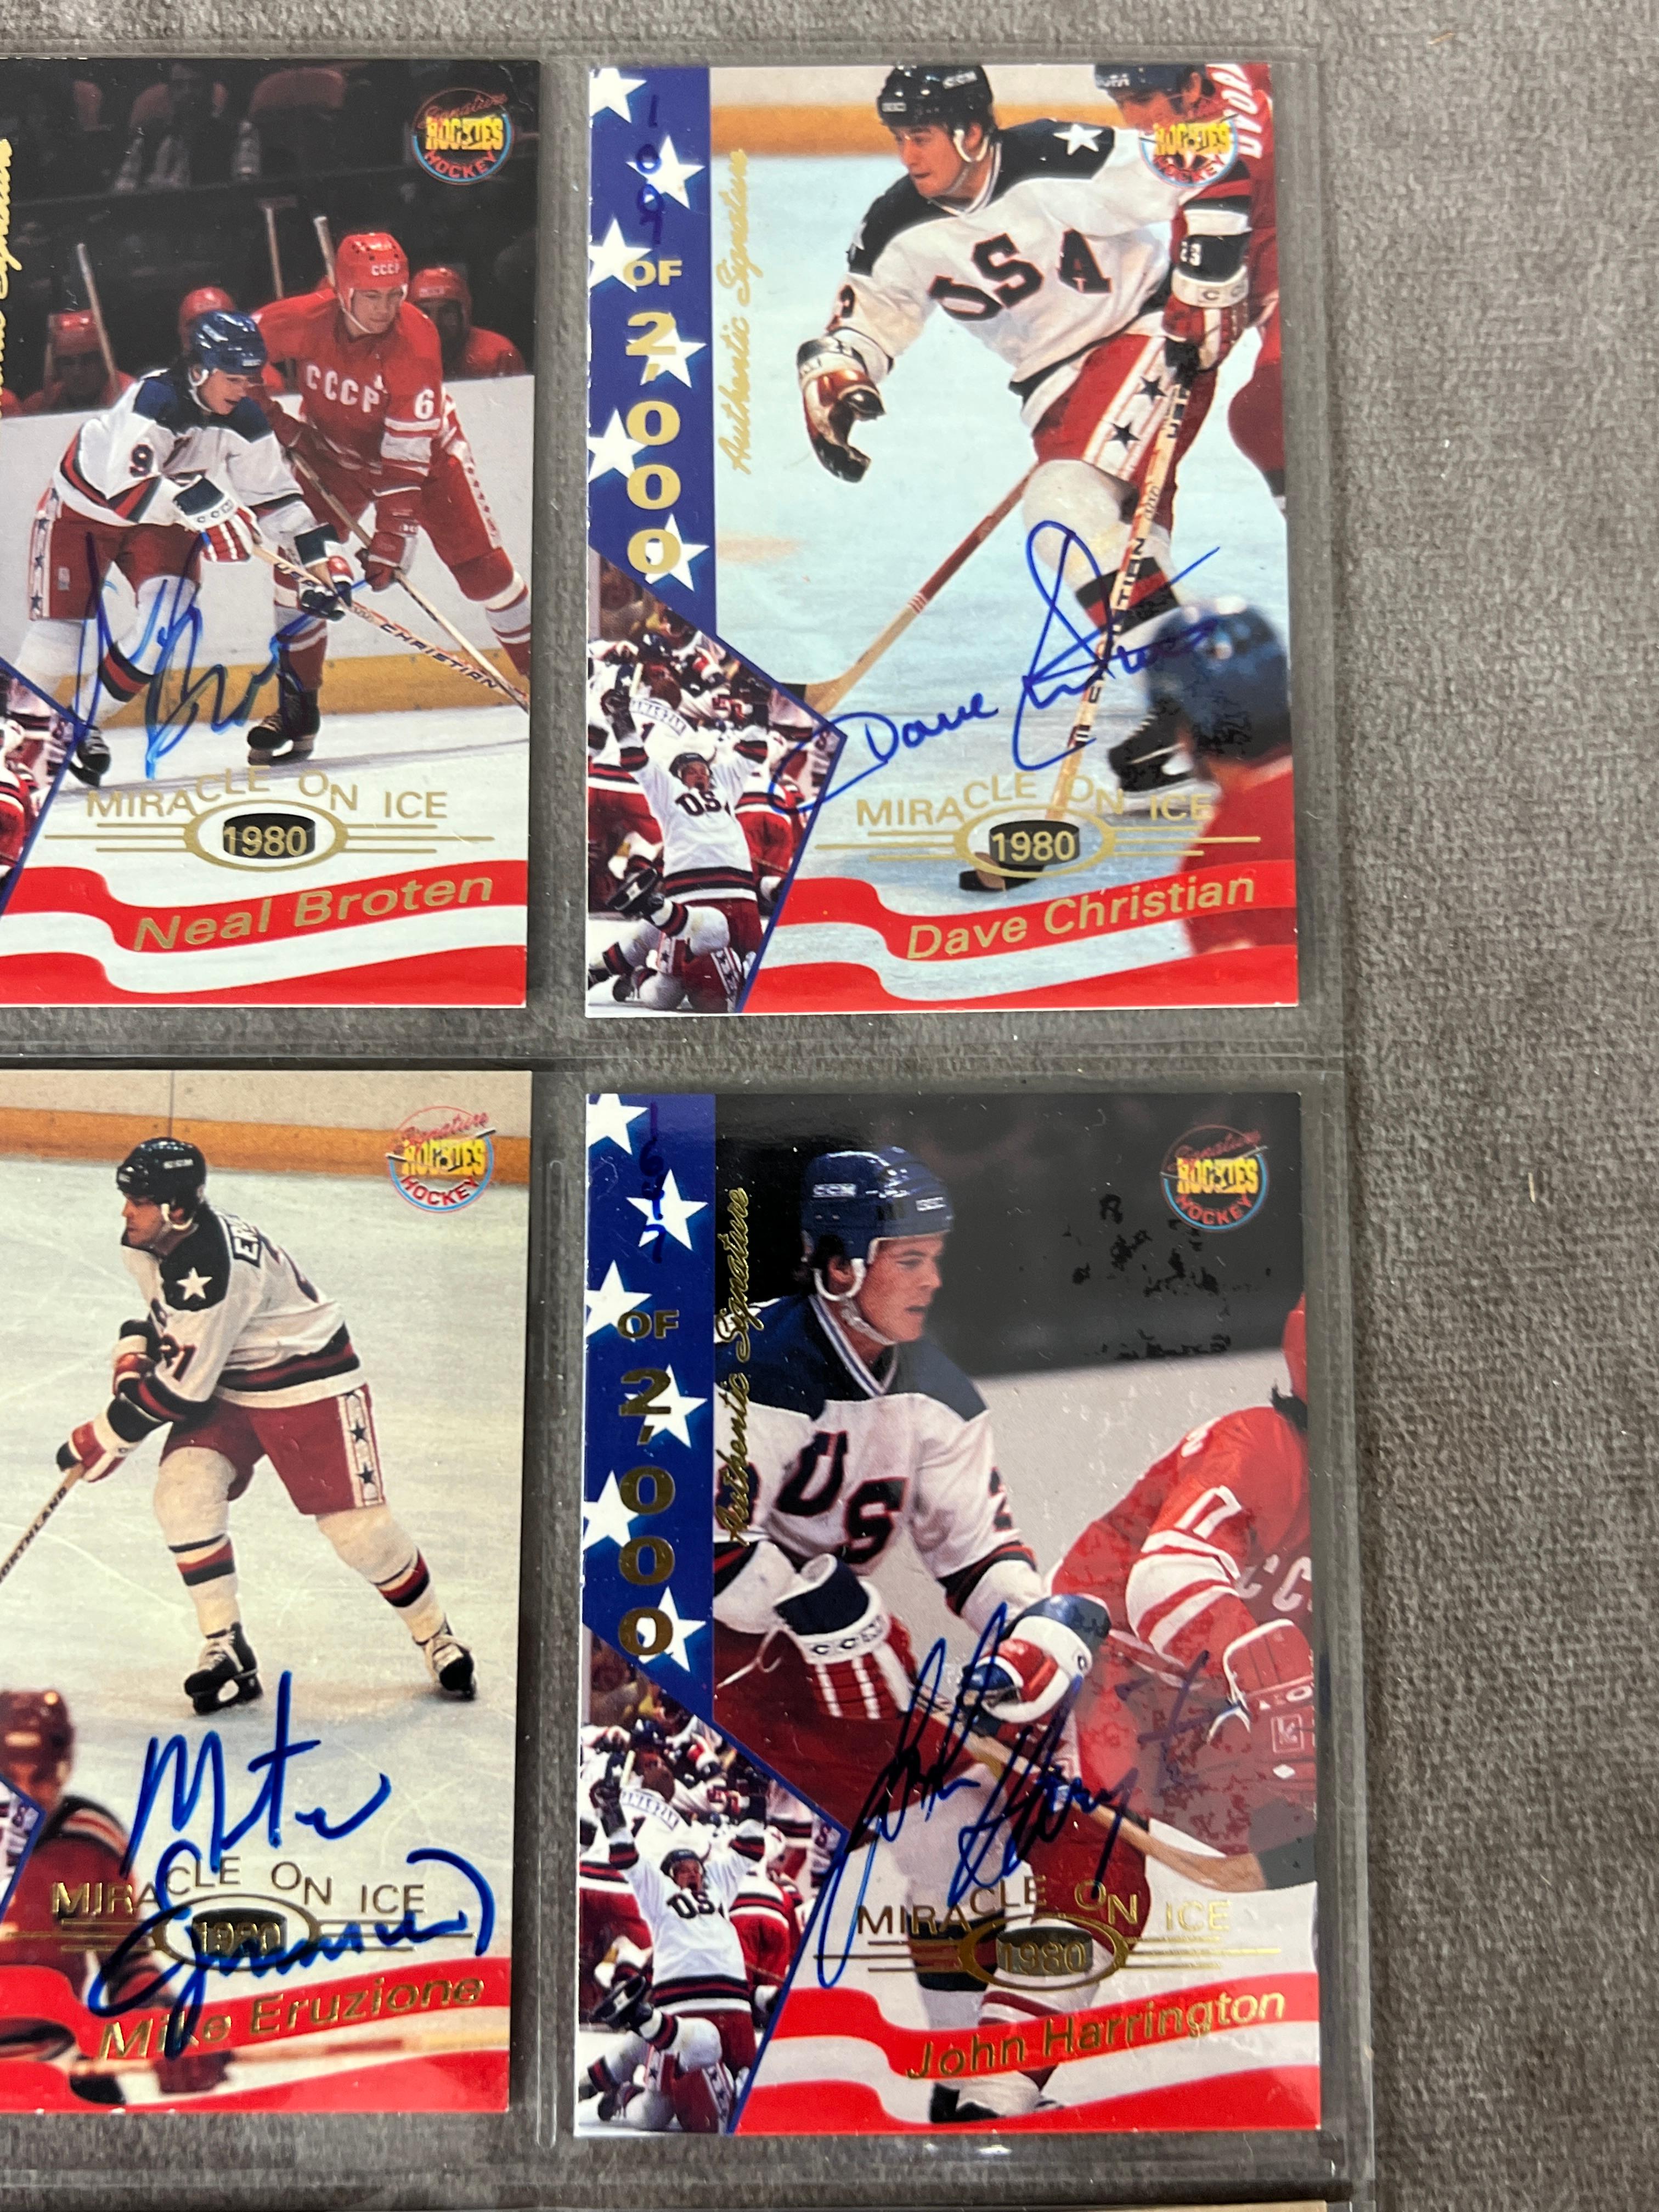 1995 Signed Rookies Miracle on Ice 1980 Signatures Bob Suter Autograph card Collection lot NHL hocke